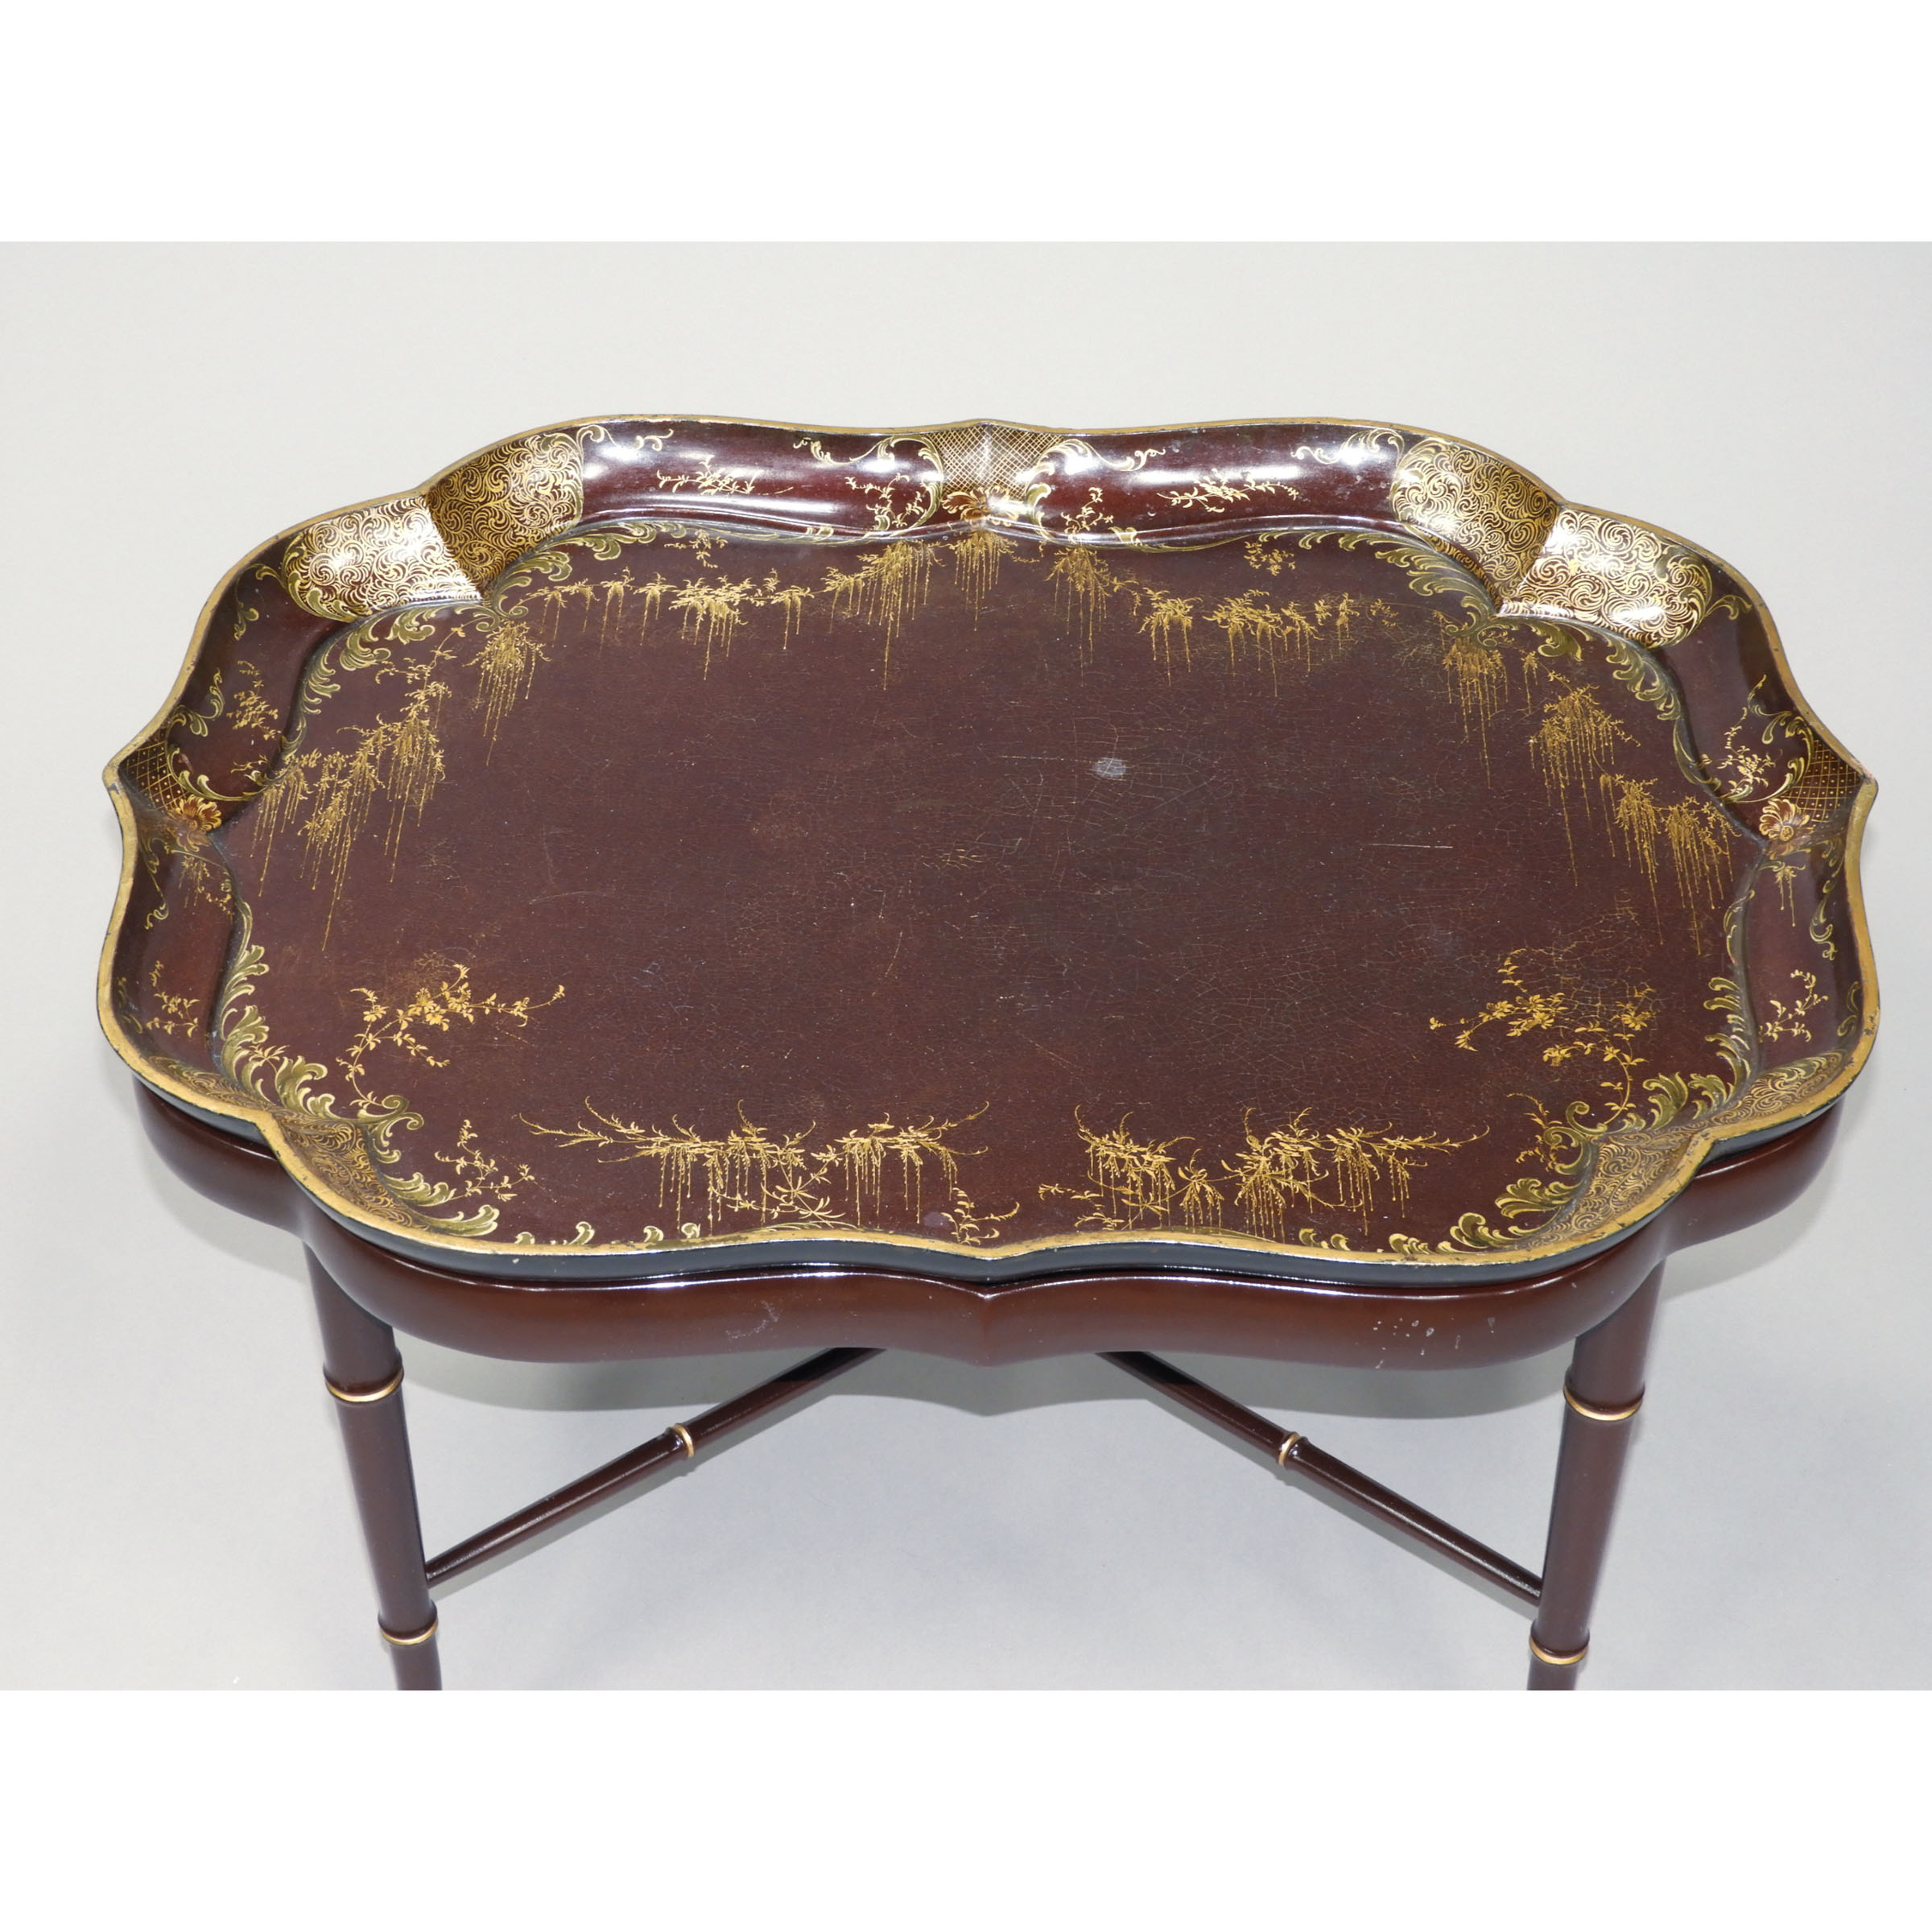 Victorian Oxblood Lacquered Papier Maché Tea Tray on Stand, mid 19th century and Later